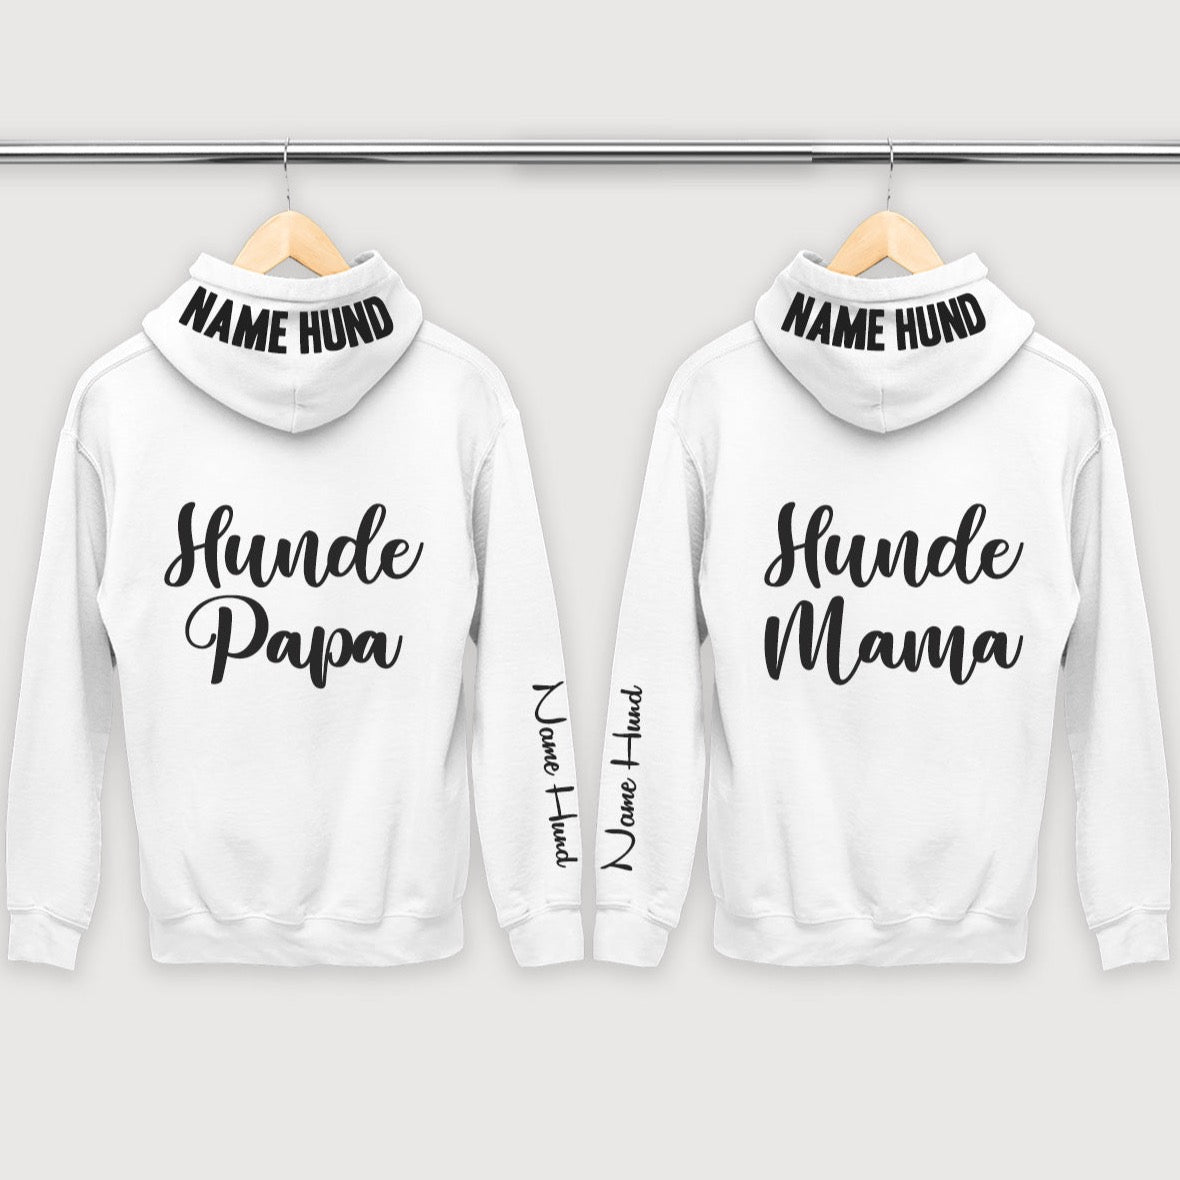 gassioutfit gassi gehen Hunde outfit Hundejacke Hunde pullover Hund tshirt weiss